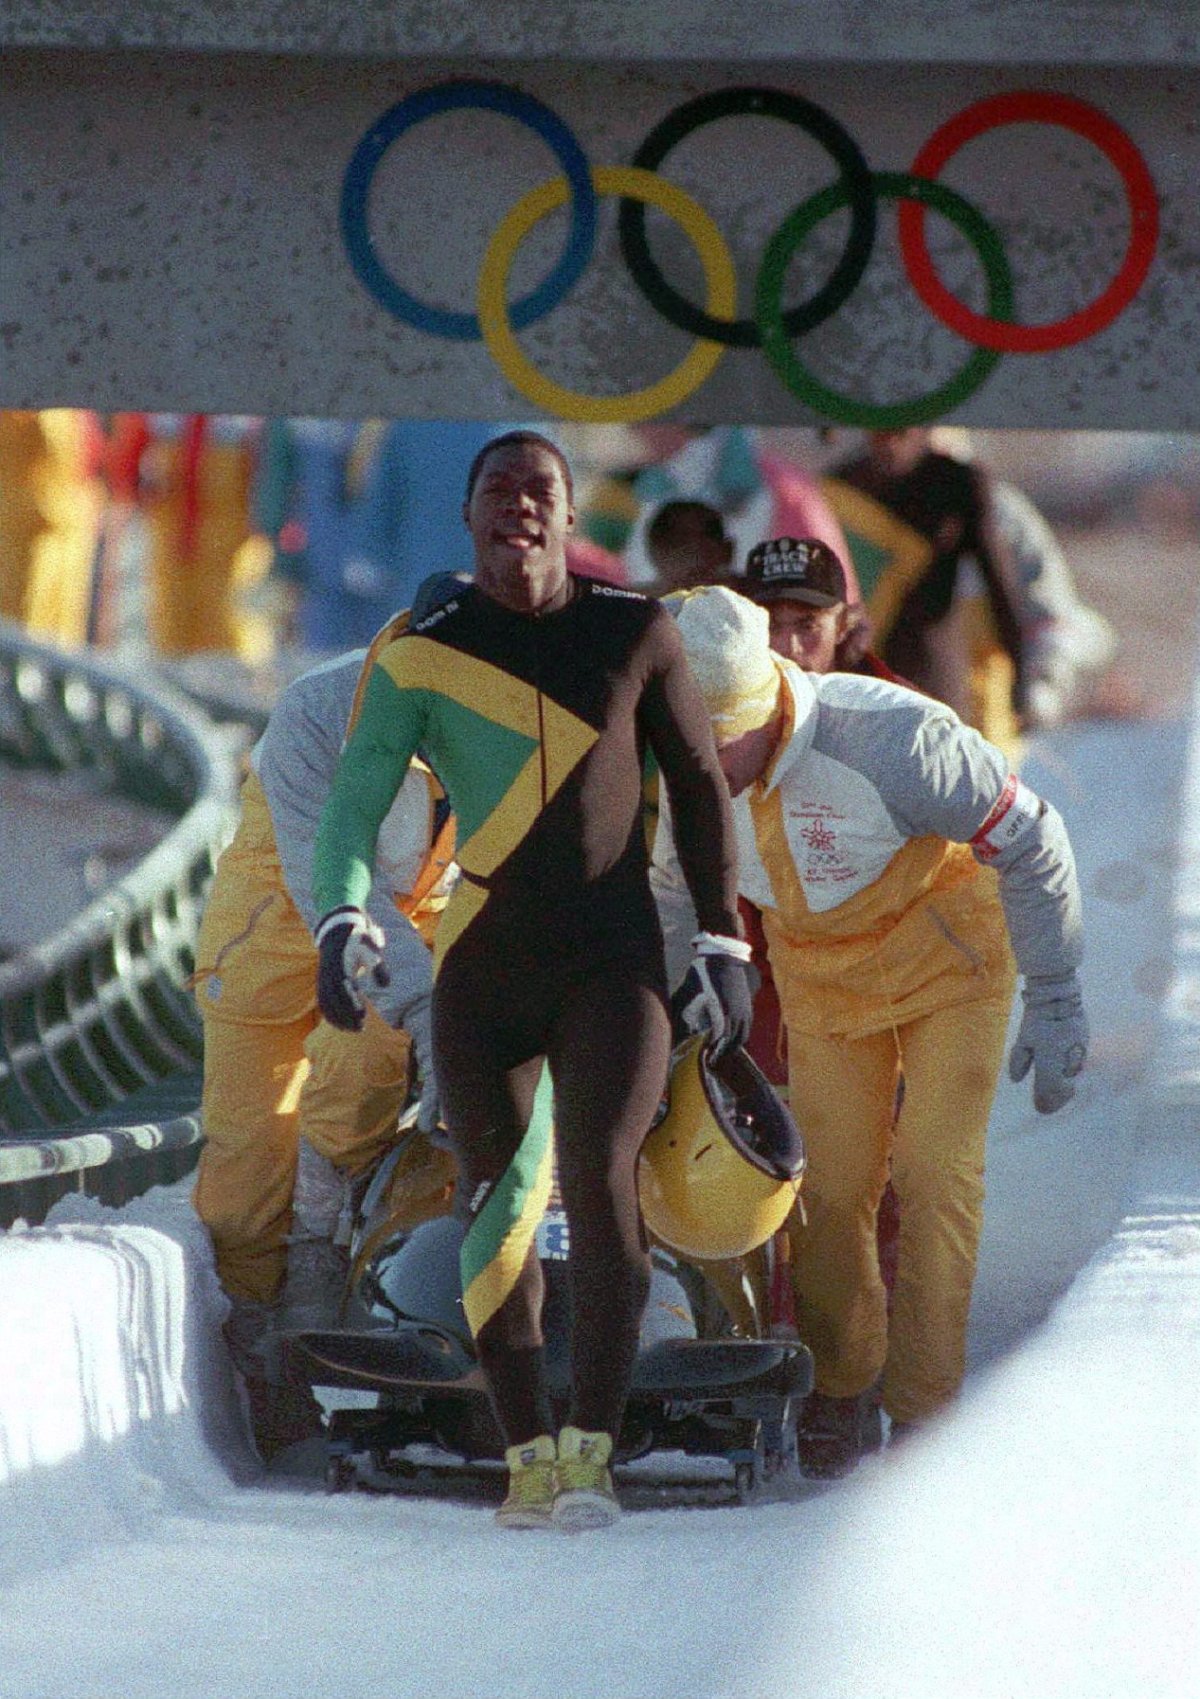 Members of the Jamaican four-man bobsled team walk up the course after wiping out during a run at the 1988 Winter Olympics in Calgary, Dec. 23, 1988. 